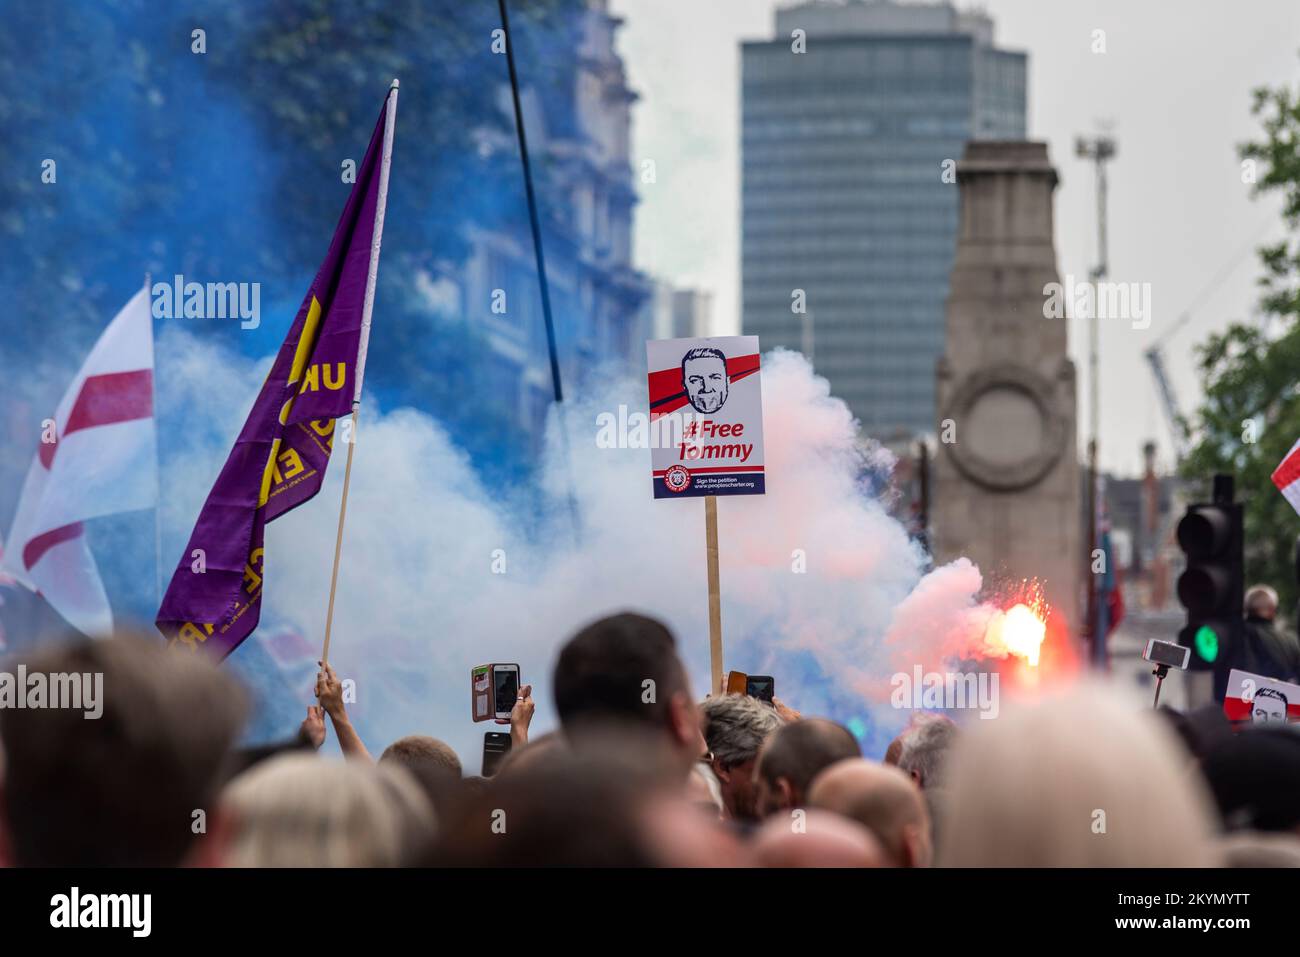 Supporters of Tommy Robinson, such as the EDL, protested in London demonstrating for his release after arrest. Smoke flare and free Tommy placard Stock Photo